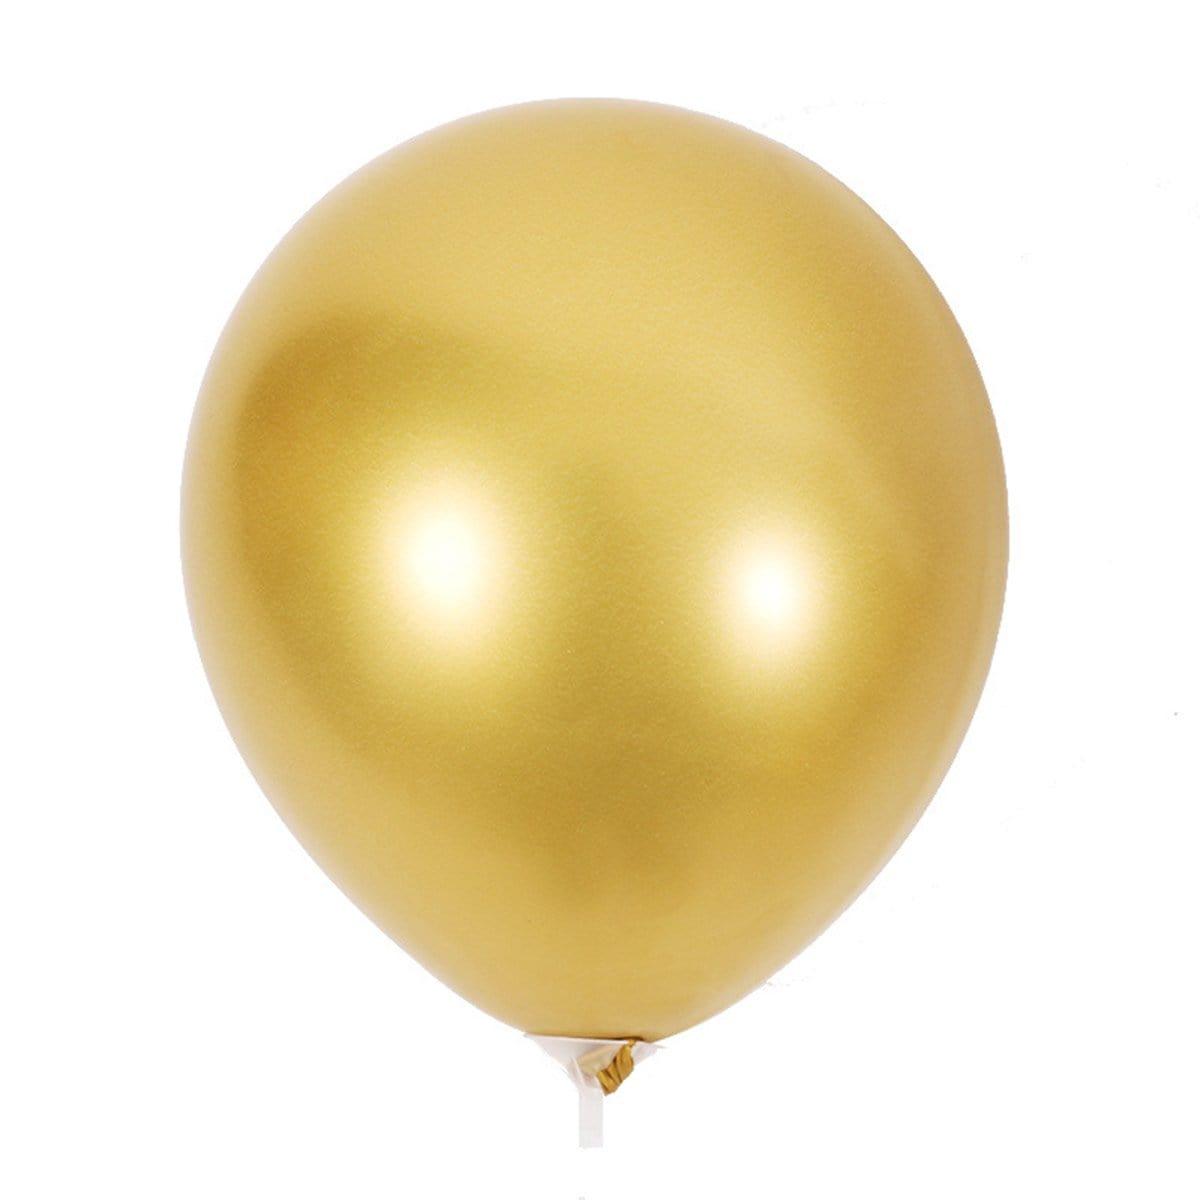 Buy Balloons Gold Latex Balloon 5 Inches, Chrome Collection, 100 Count sold at Party Expert